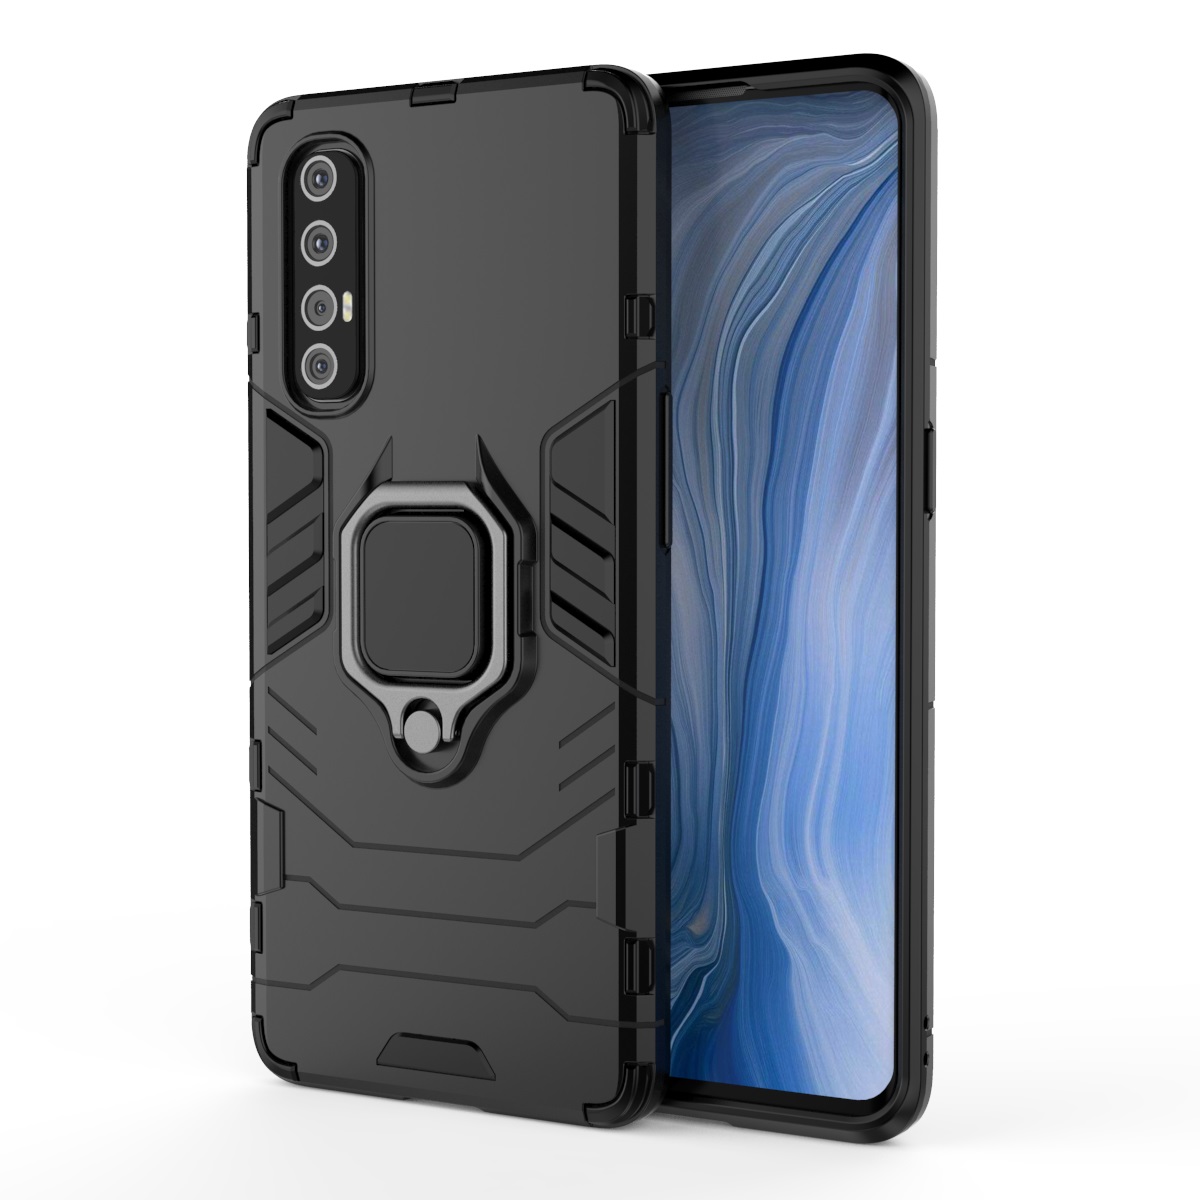 

Armor Anti-Fall Phone Cases For OPPO Find X3 X2 Pro Lite Neo Reno 6Pro 5Pro 4Pro 4 3Pro R15X R17 A73 A74 A54 A53 A31 A57 A35, Black